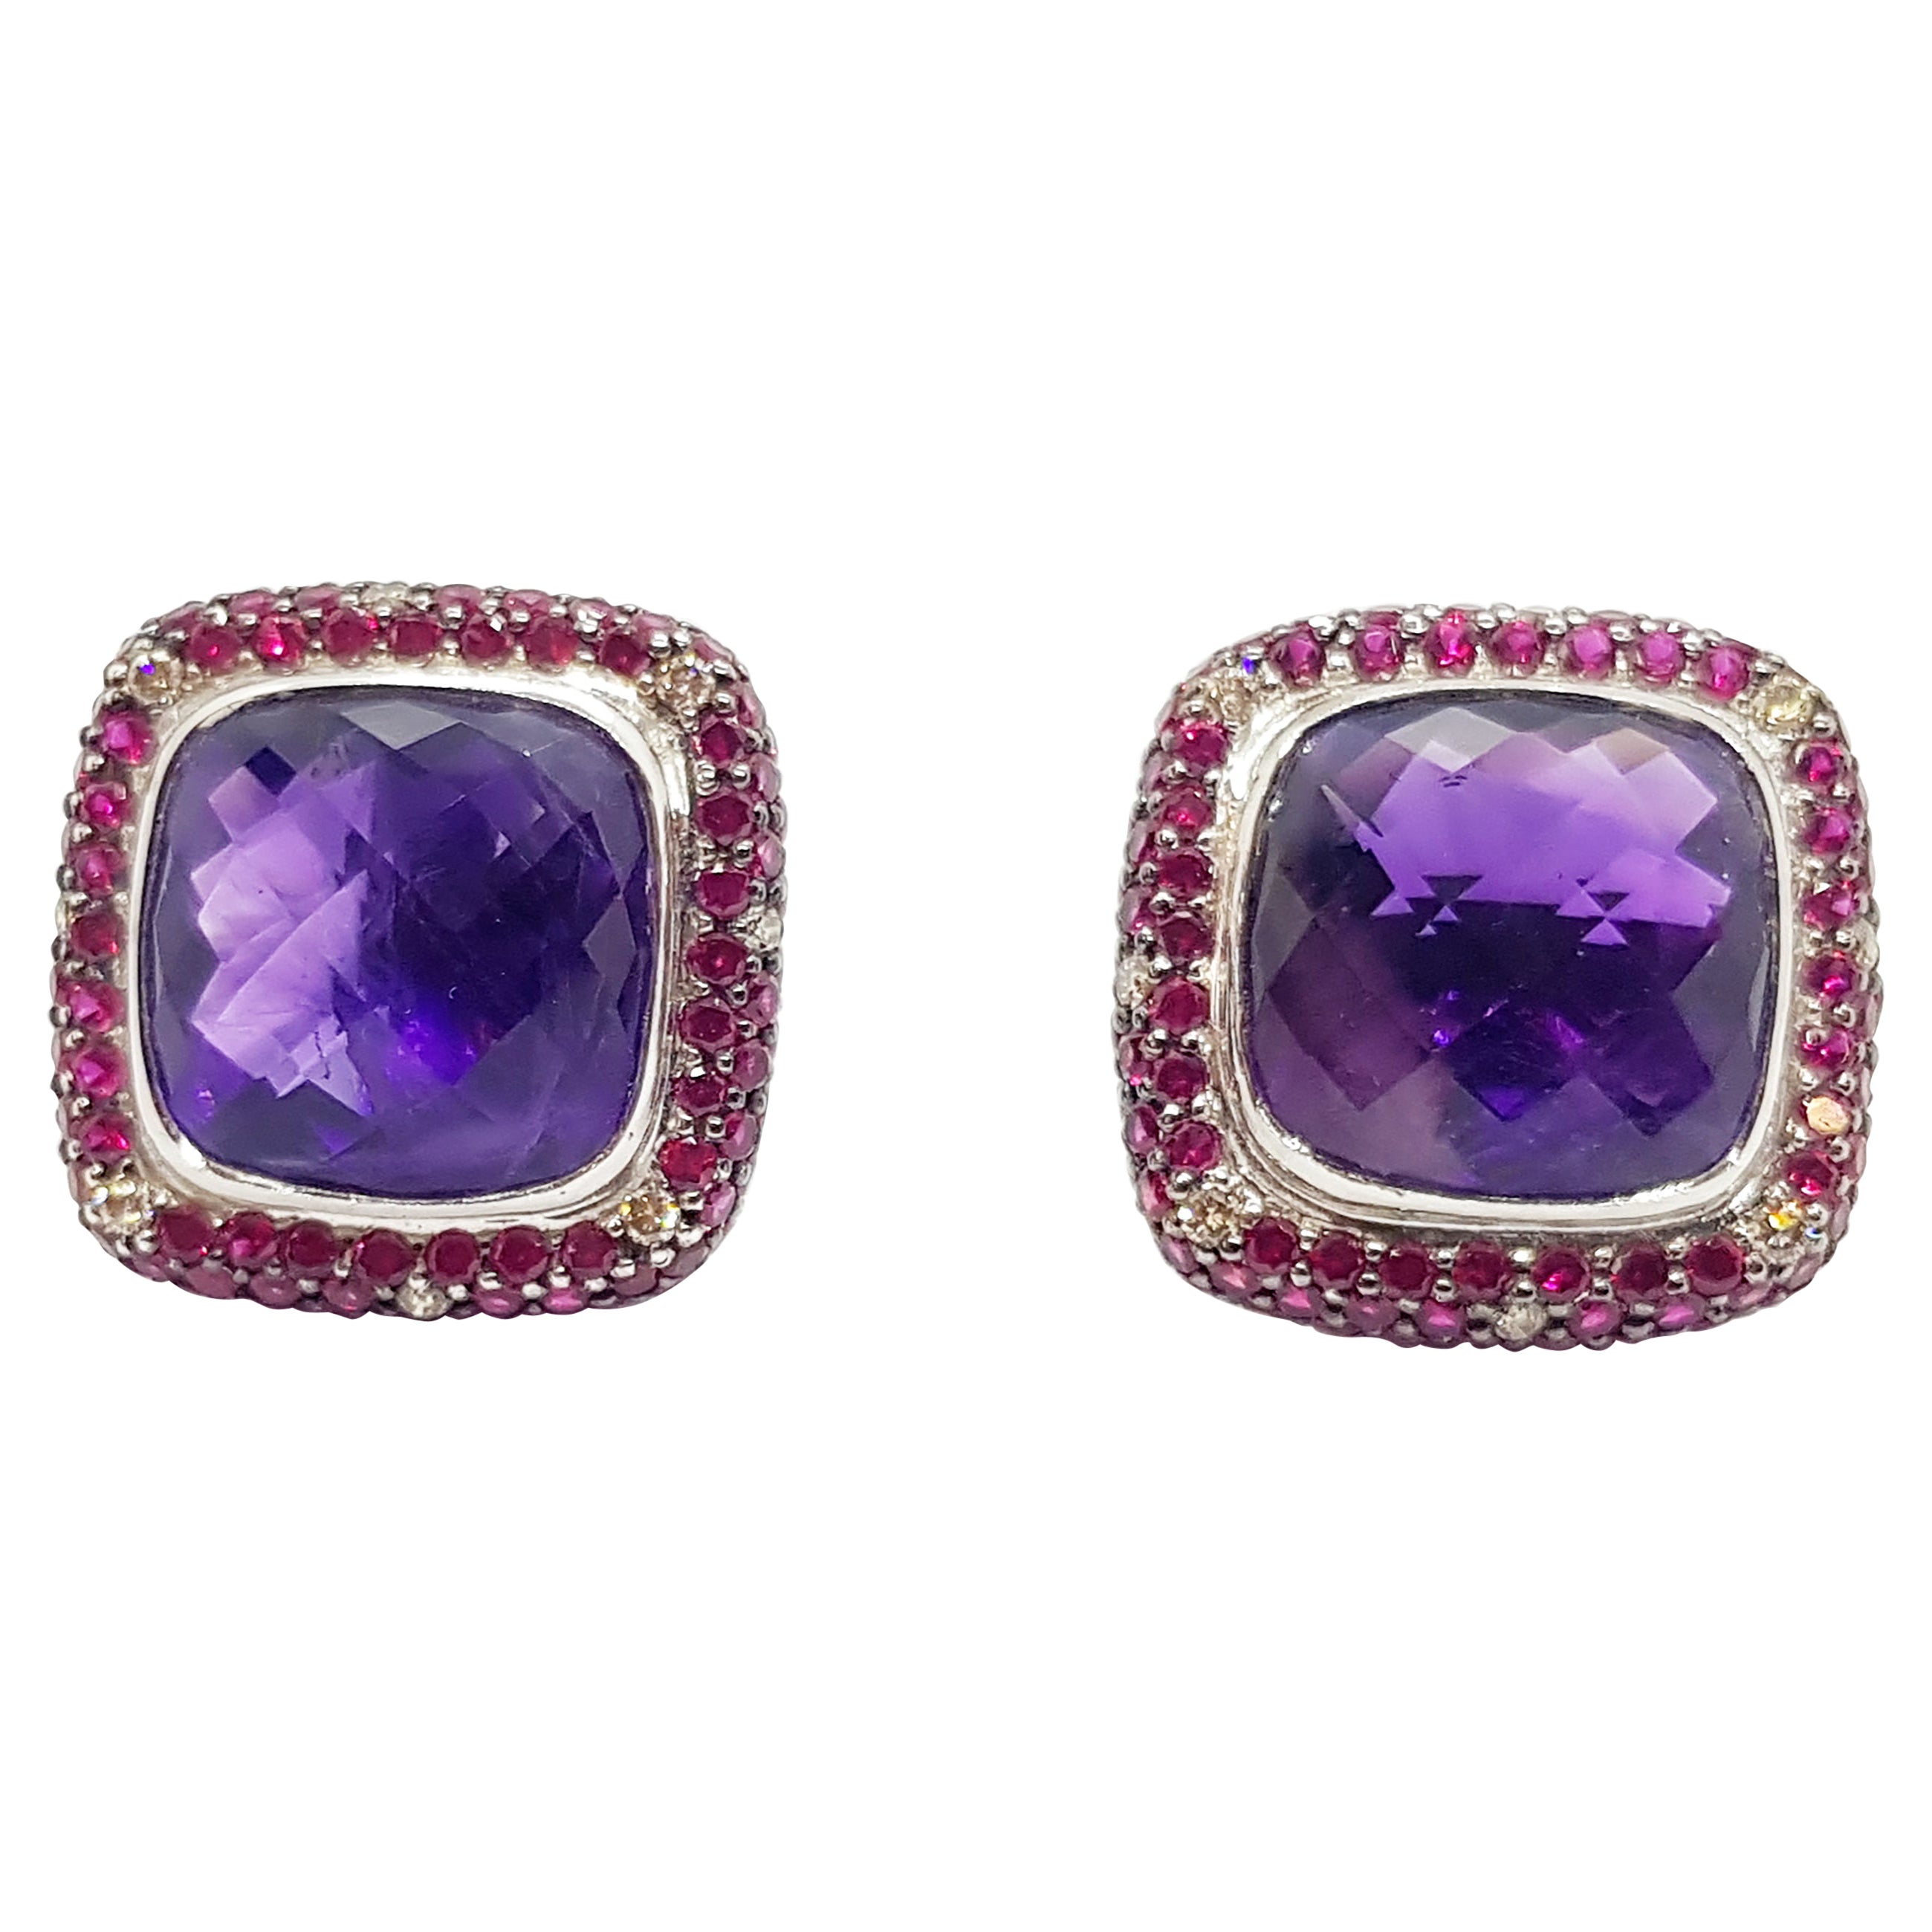 Amethyst with Ruby and Brown Diamond Earrings Set in 18 Karat White Gold Setting